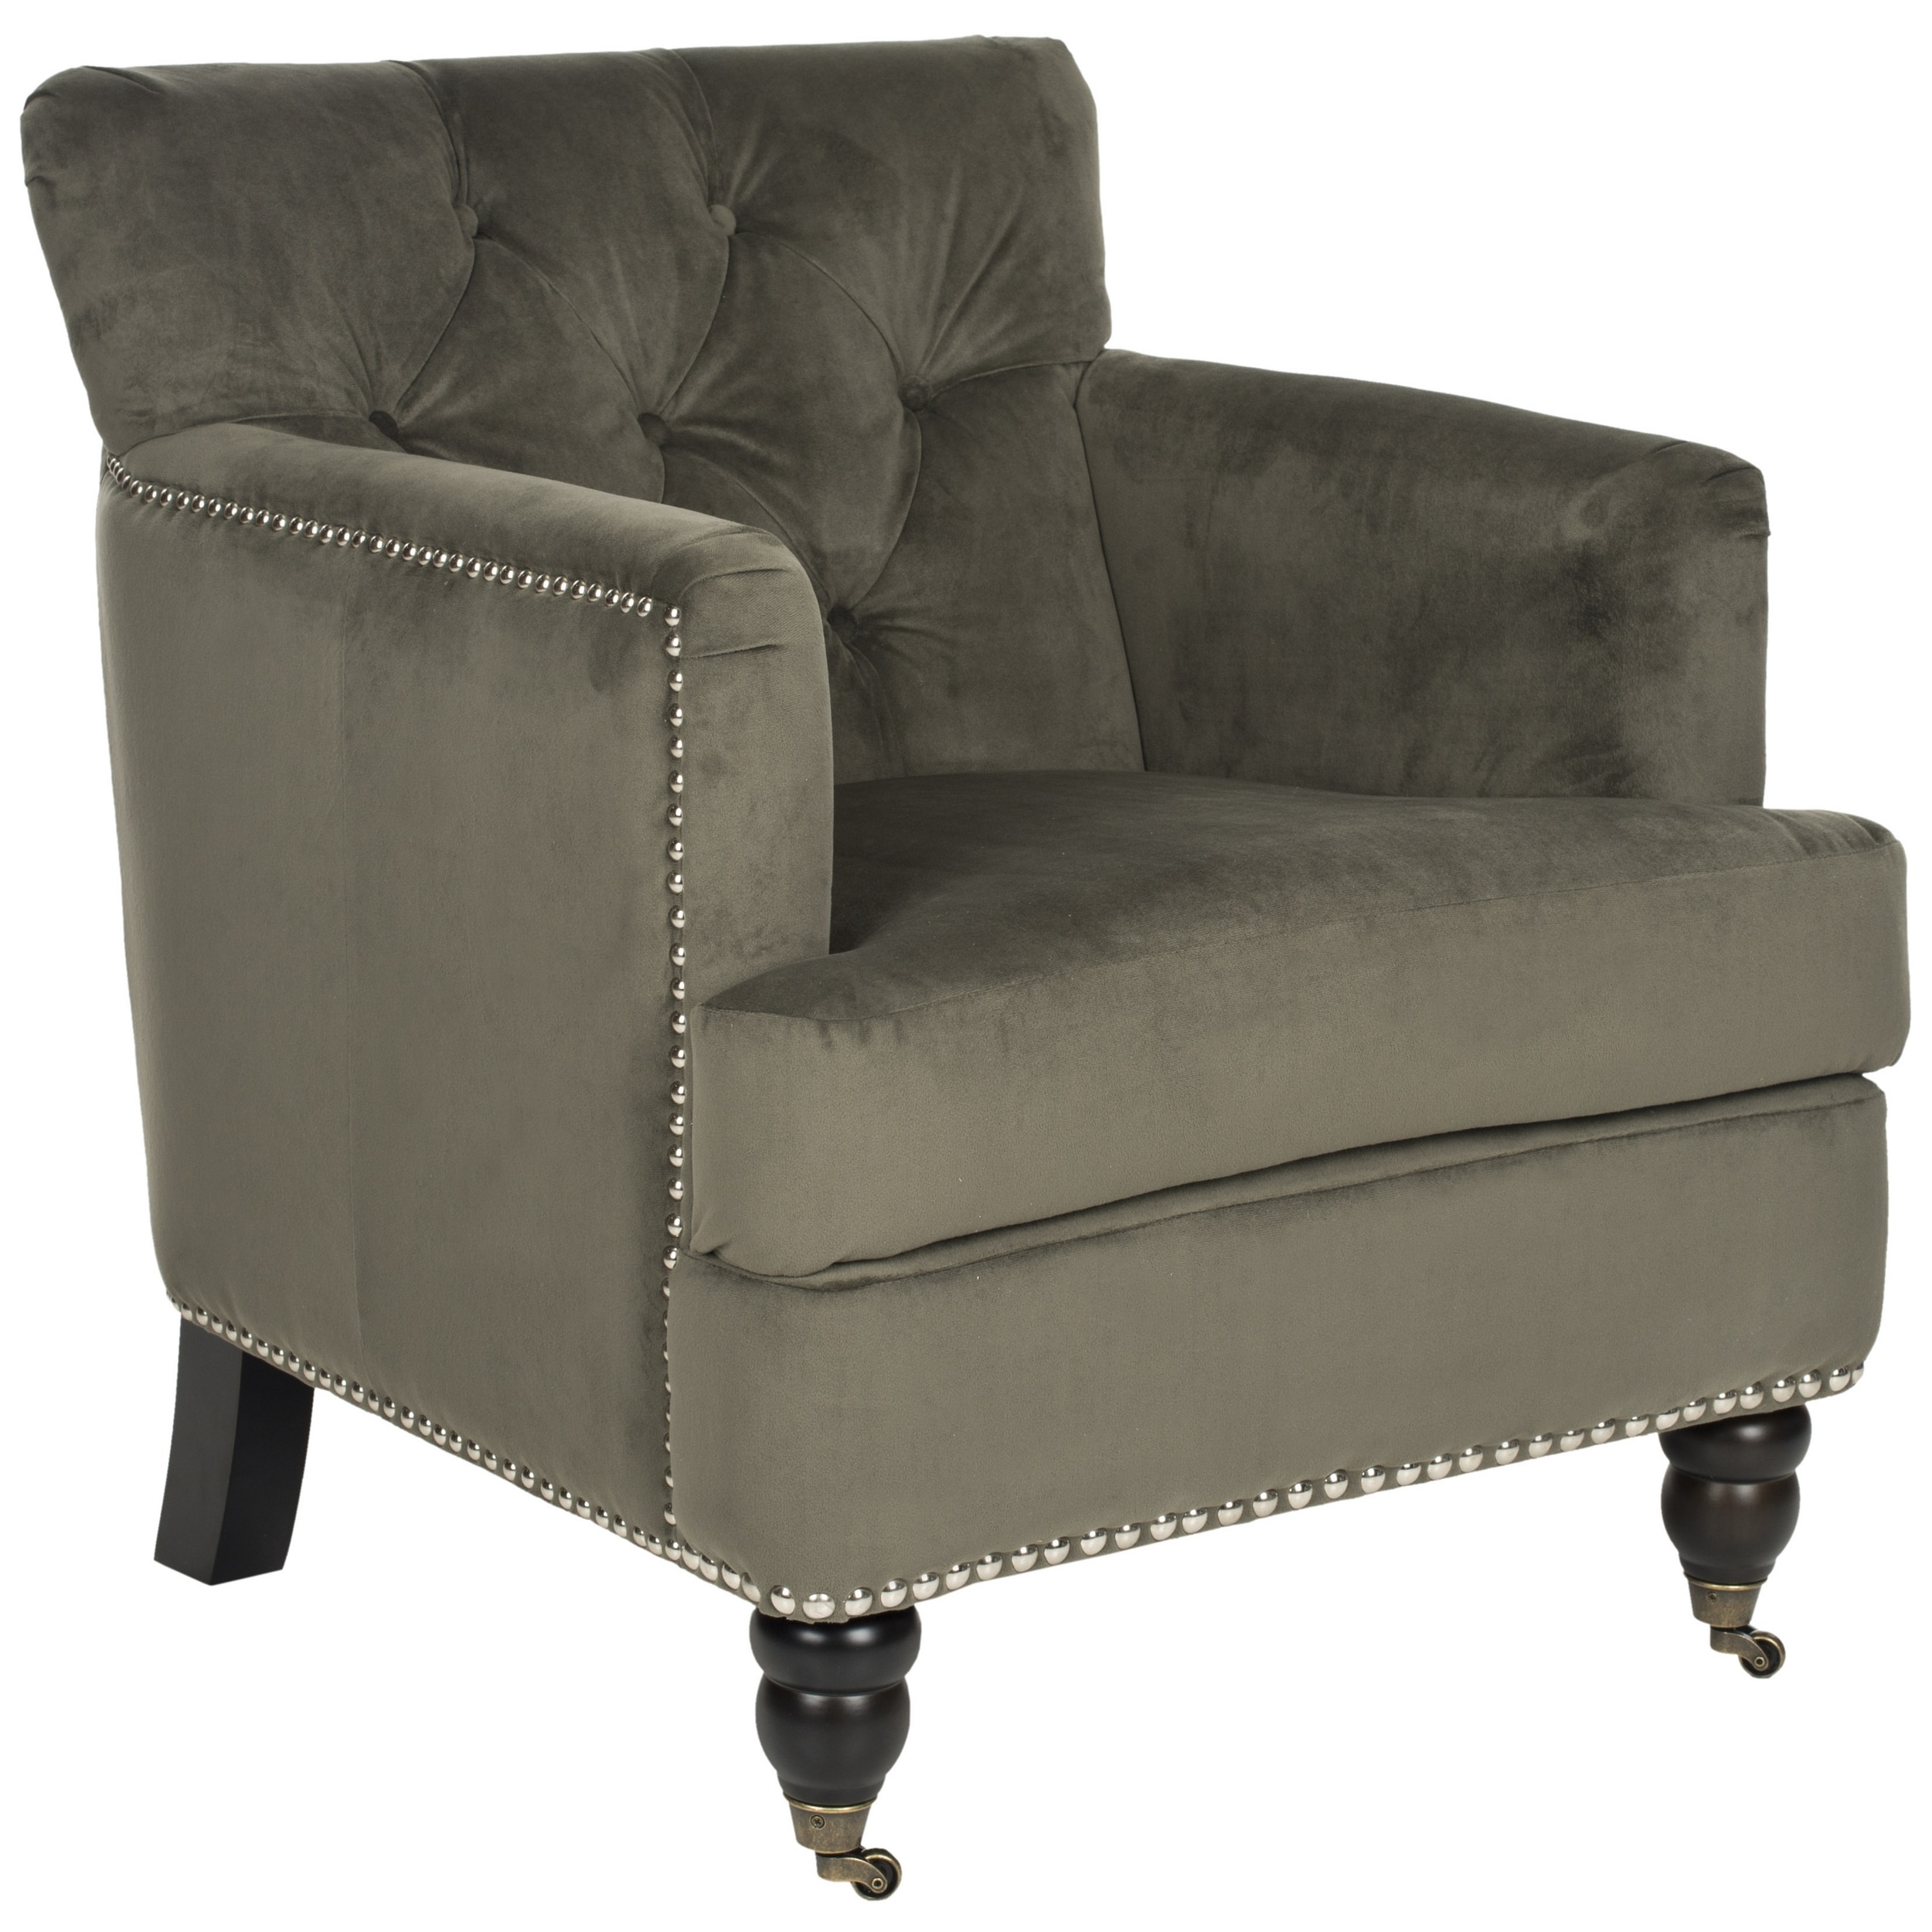 Safavieh Colin Graphite Cotton Tufted Club Chair (GraphiteMaterials Birchwood and cotton fabricFinish EspressoSeat dimensions 18.9 inches width and 21.6 inches depthSeat height 18.9 inchesDimensions 32.7 inches high x 28 inches wide x 34.4 inches dee